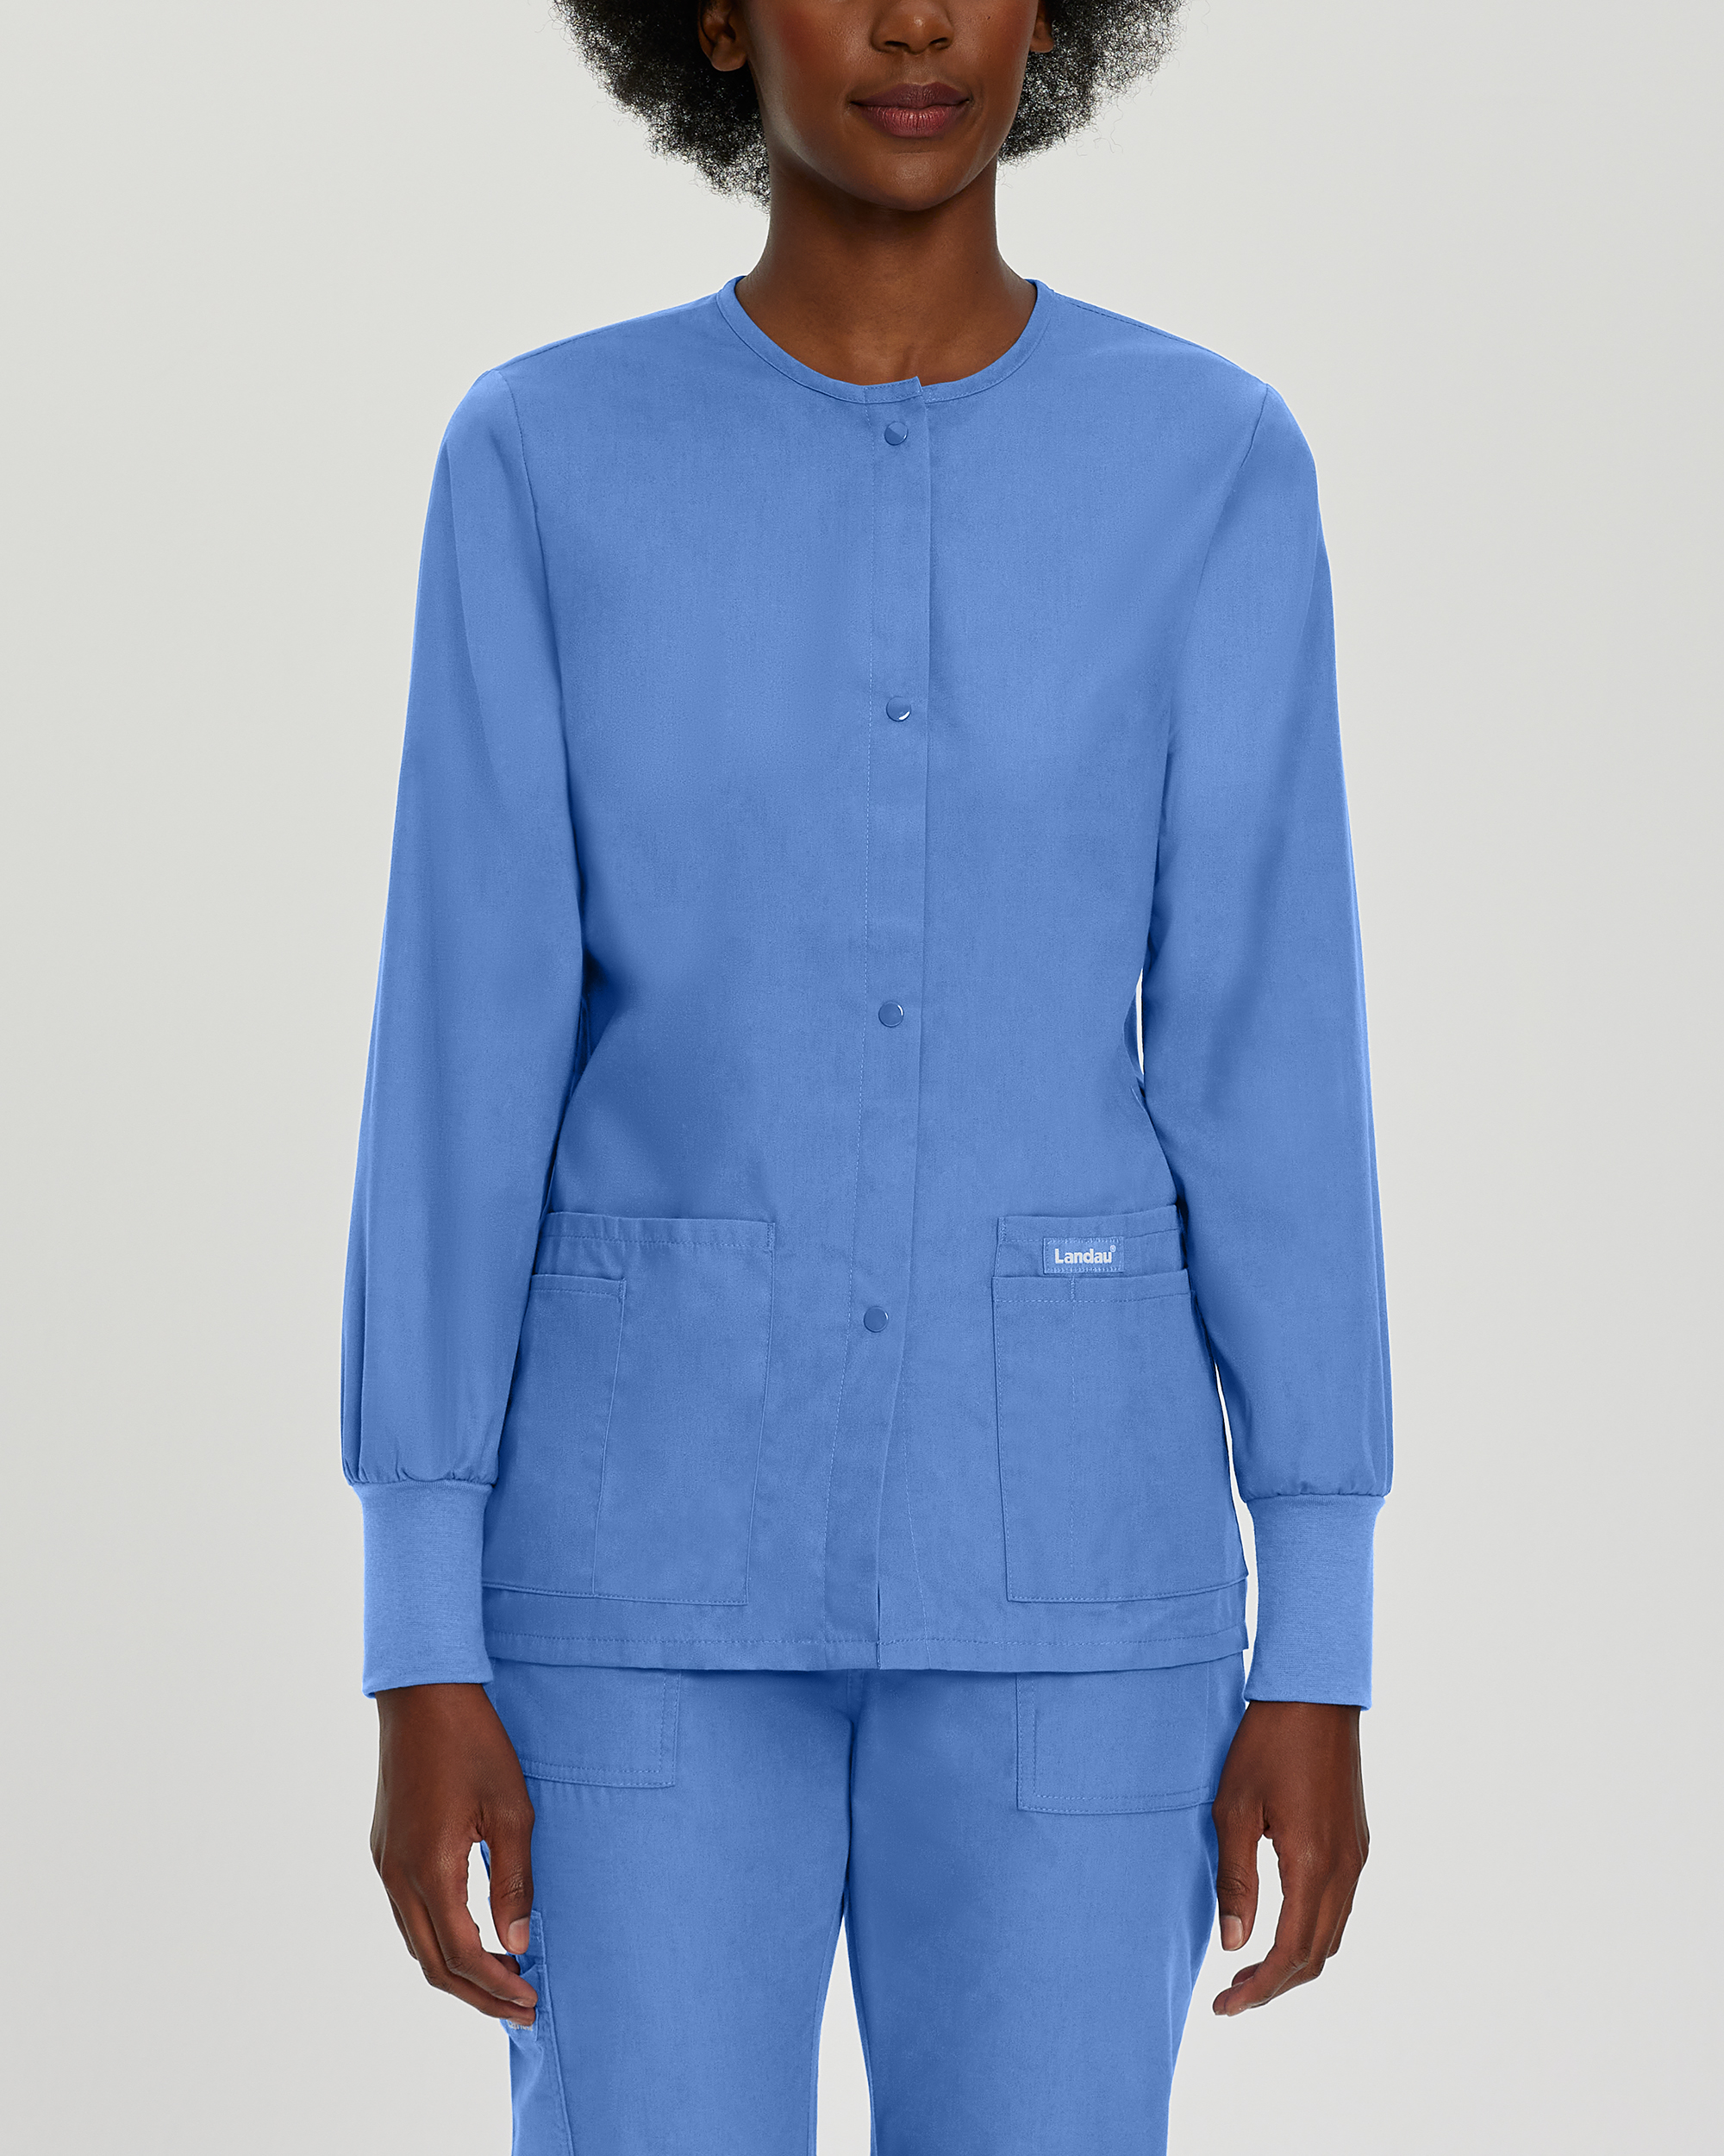 What colors are available for this scrub jacket?